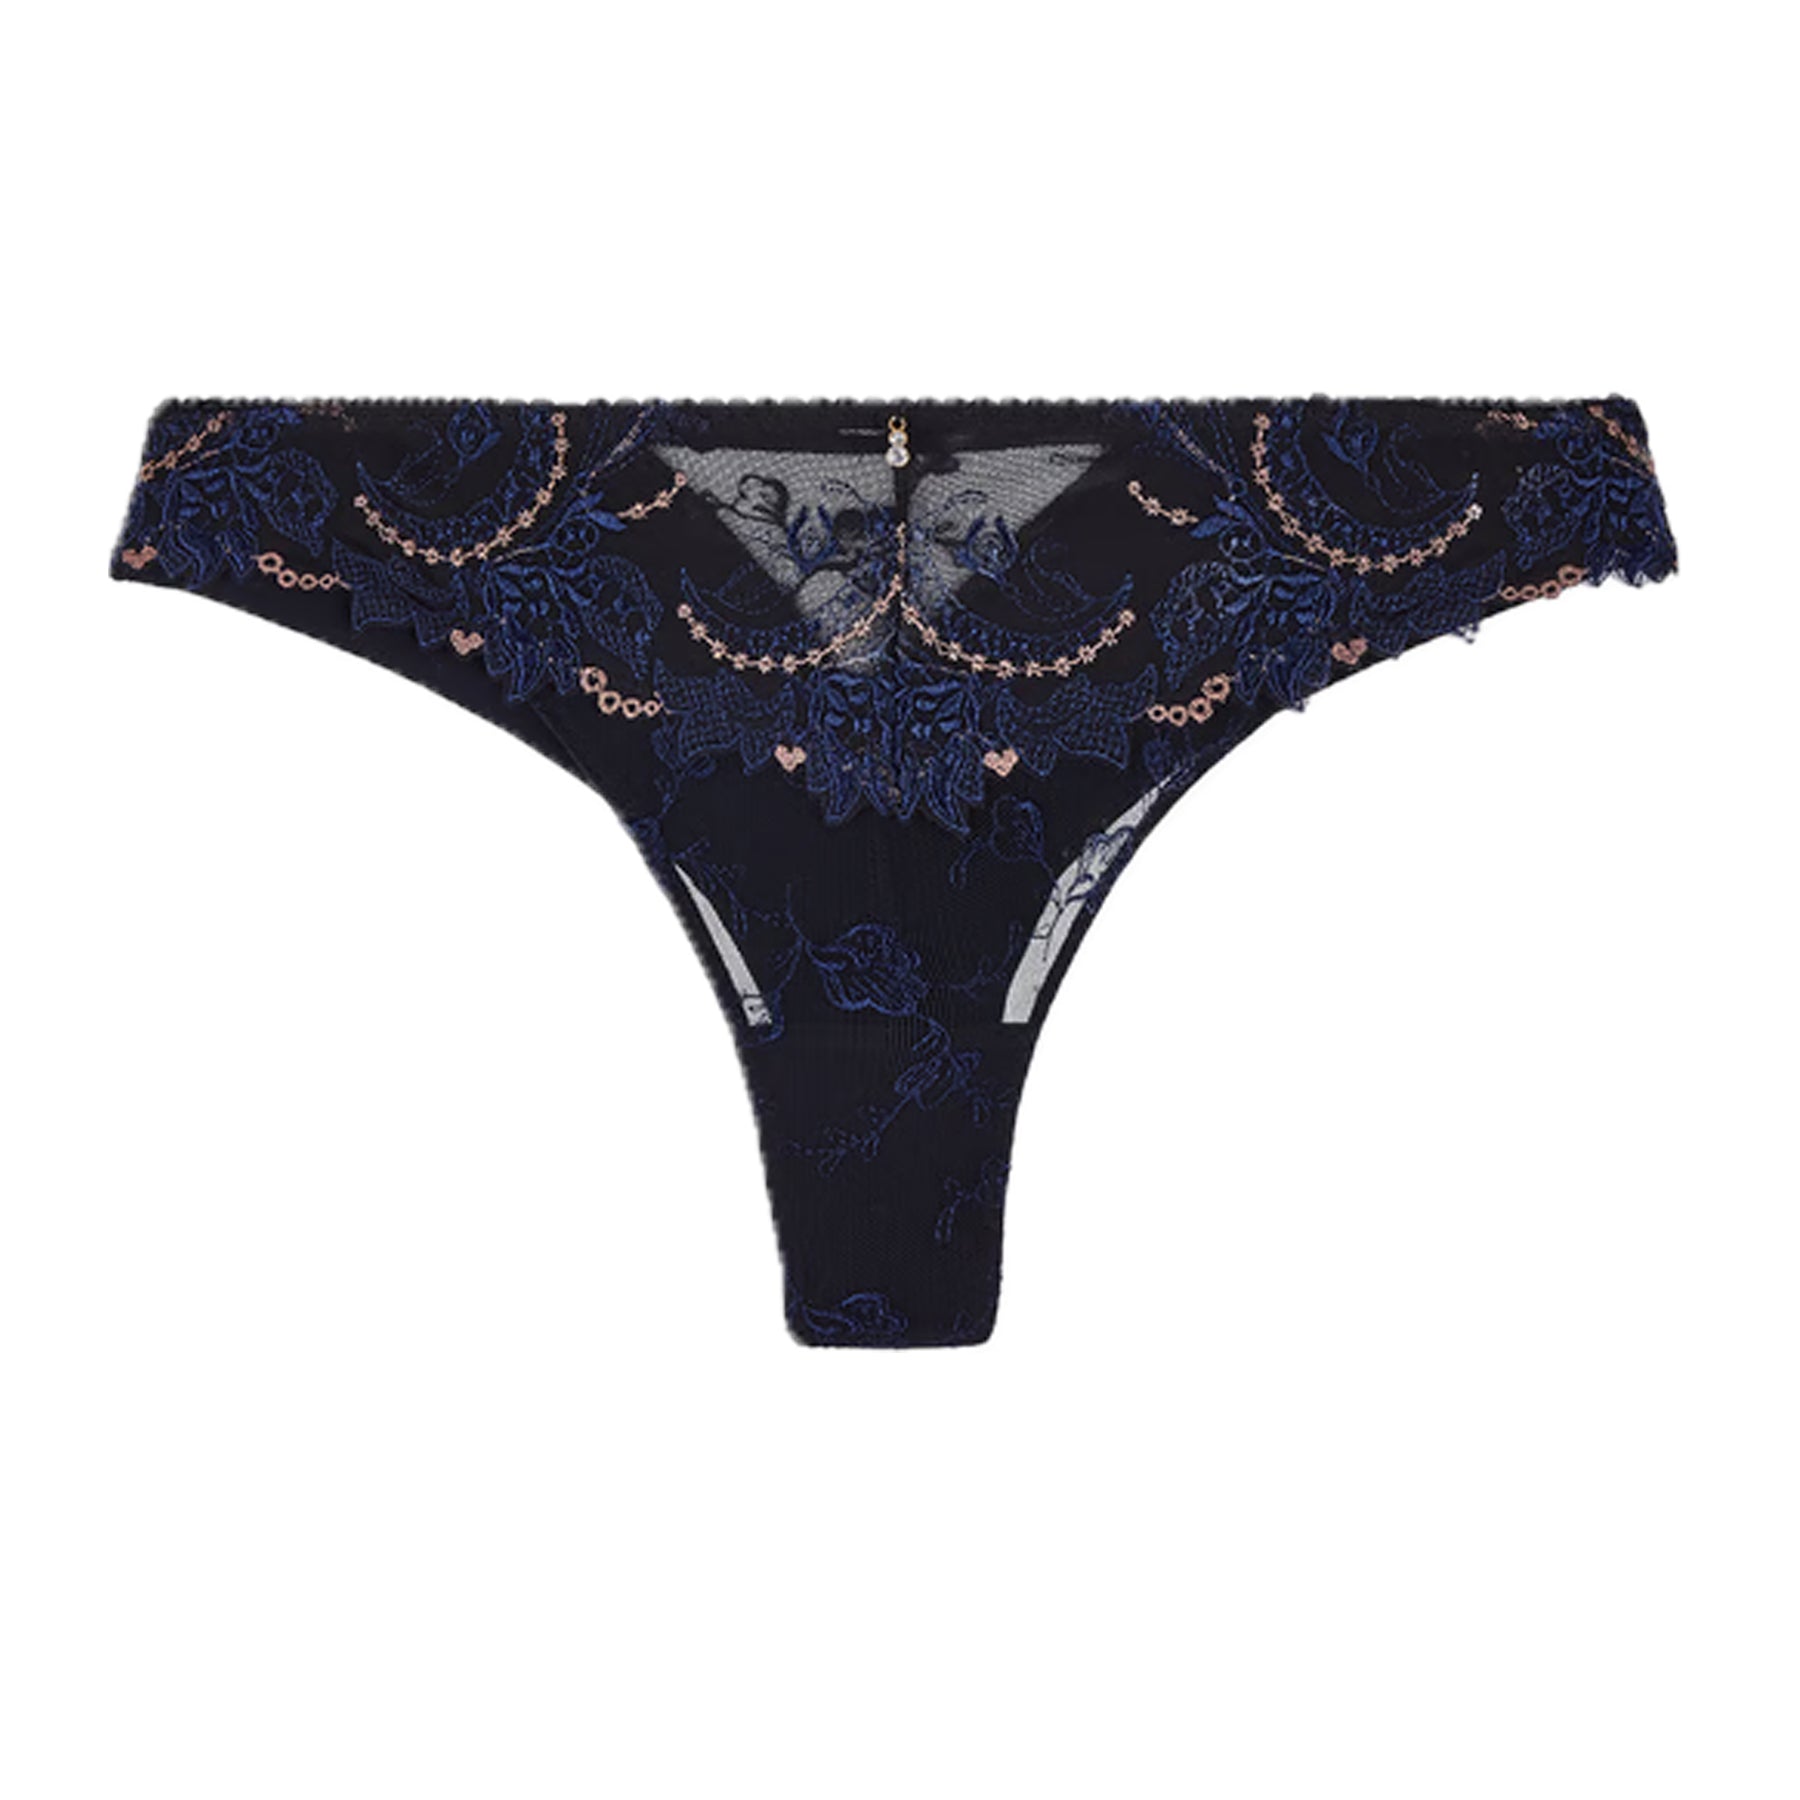 Aubade Amour Precieux St-Tropez Short UD70 – My Top Drawer